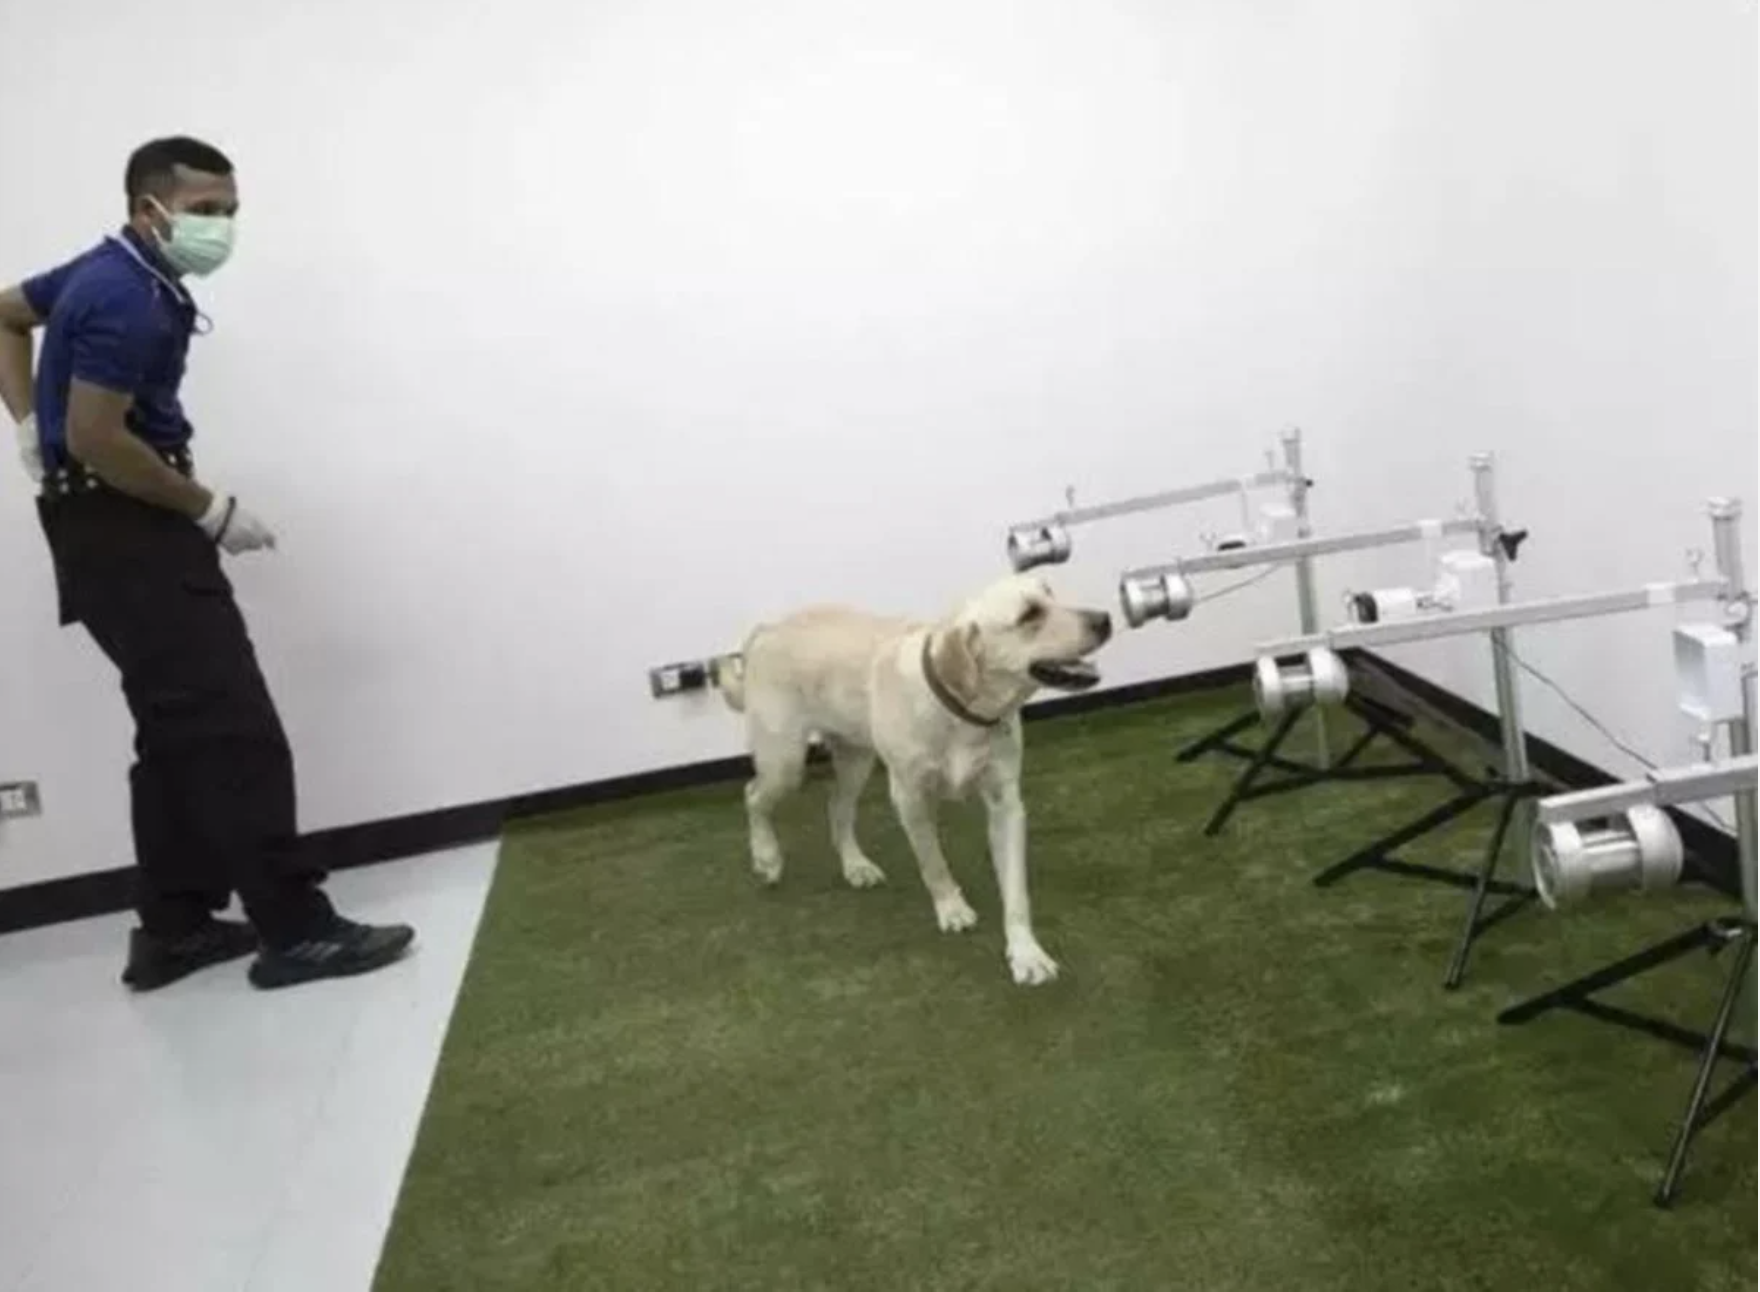 These dogs can detect covid-19 with their noses with a 95% accuracy rate